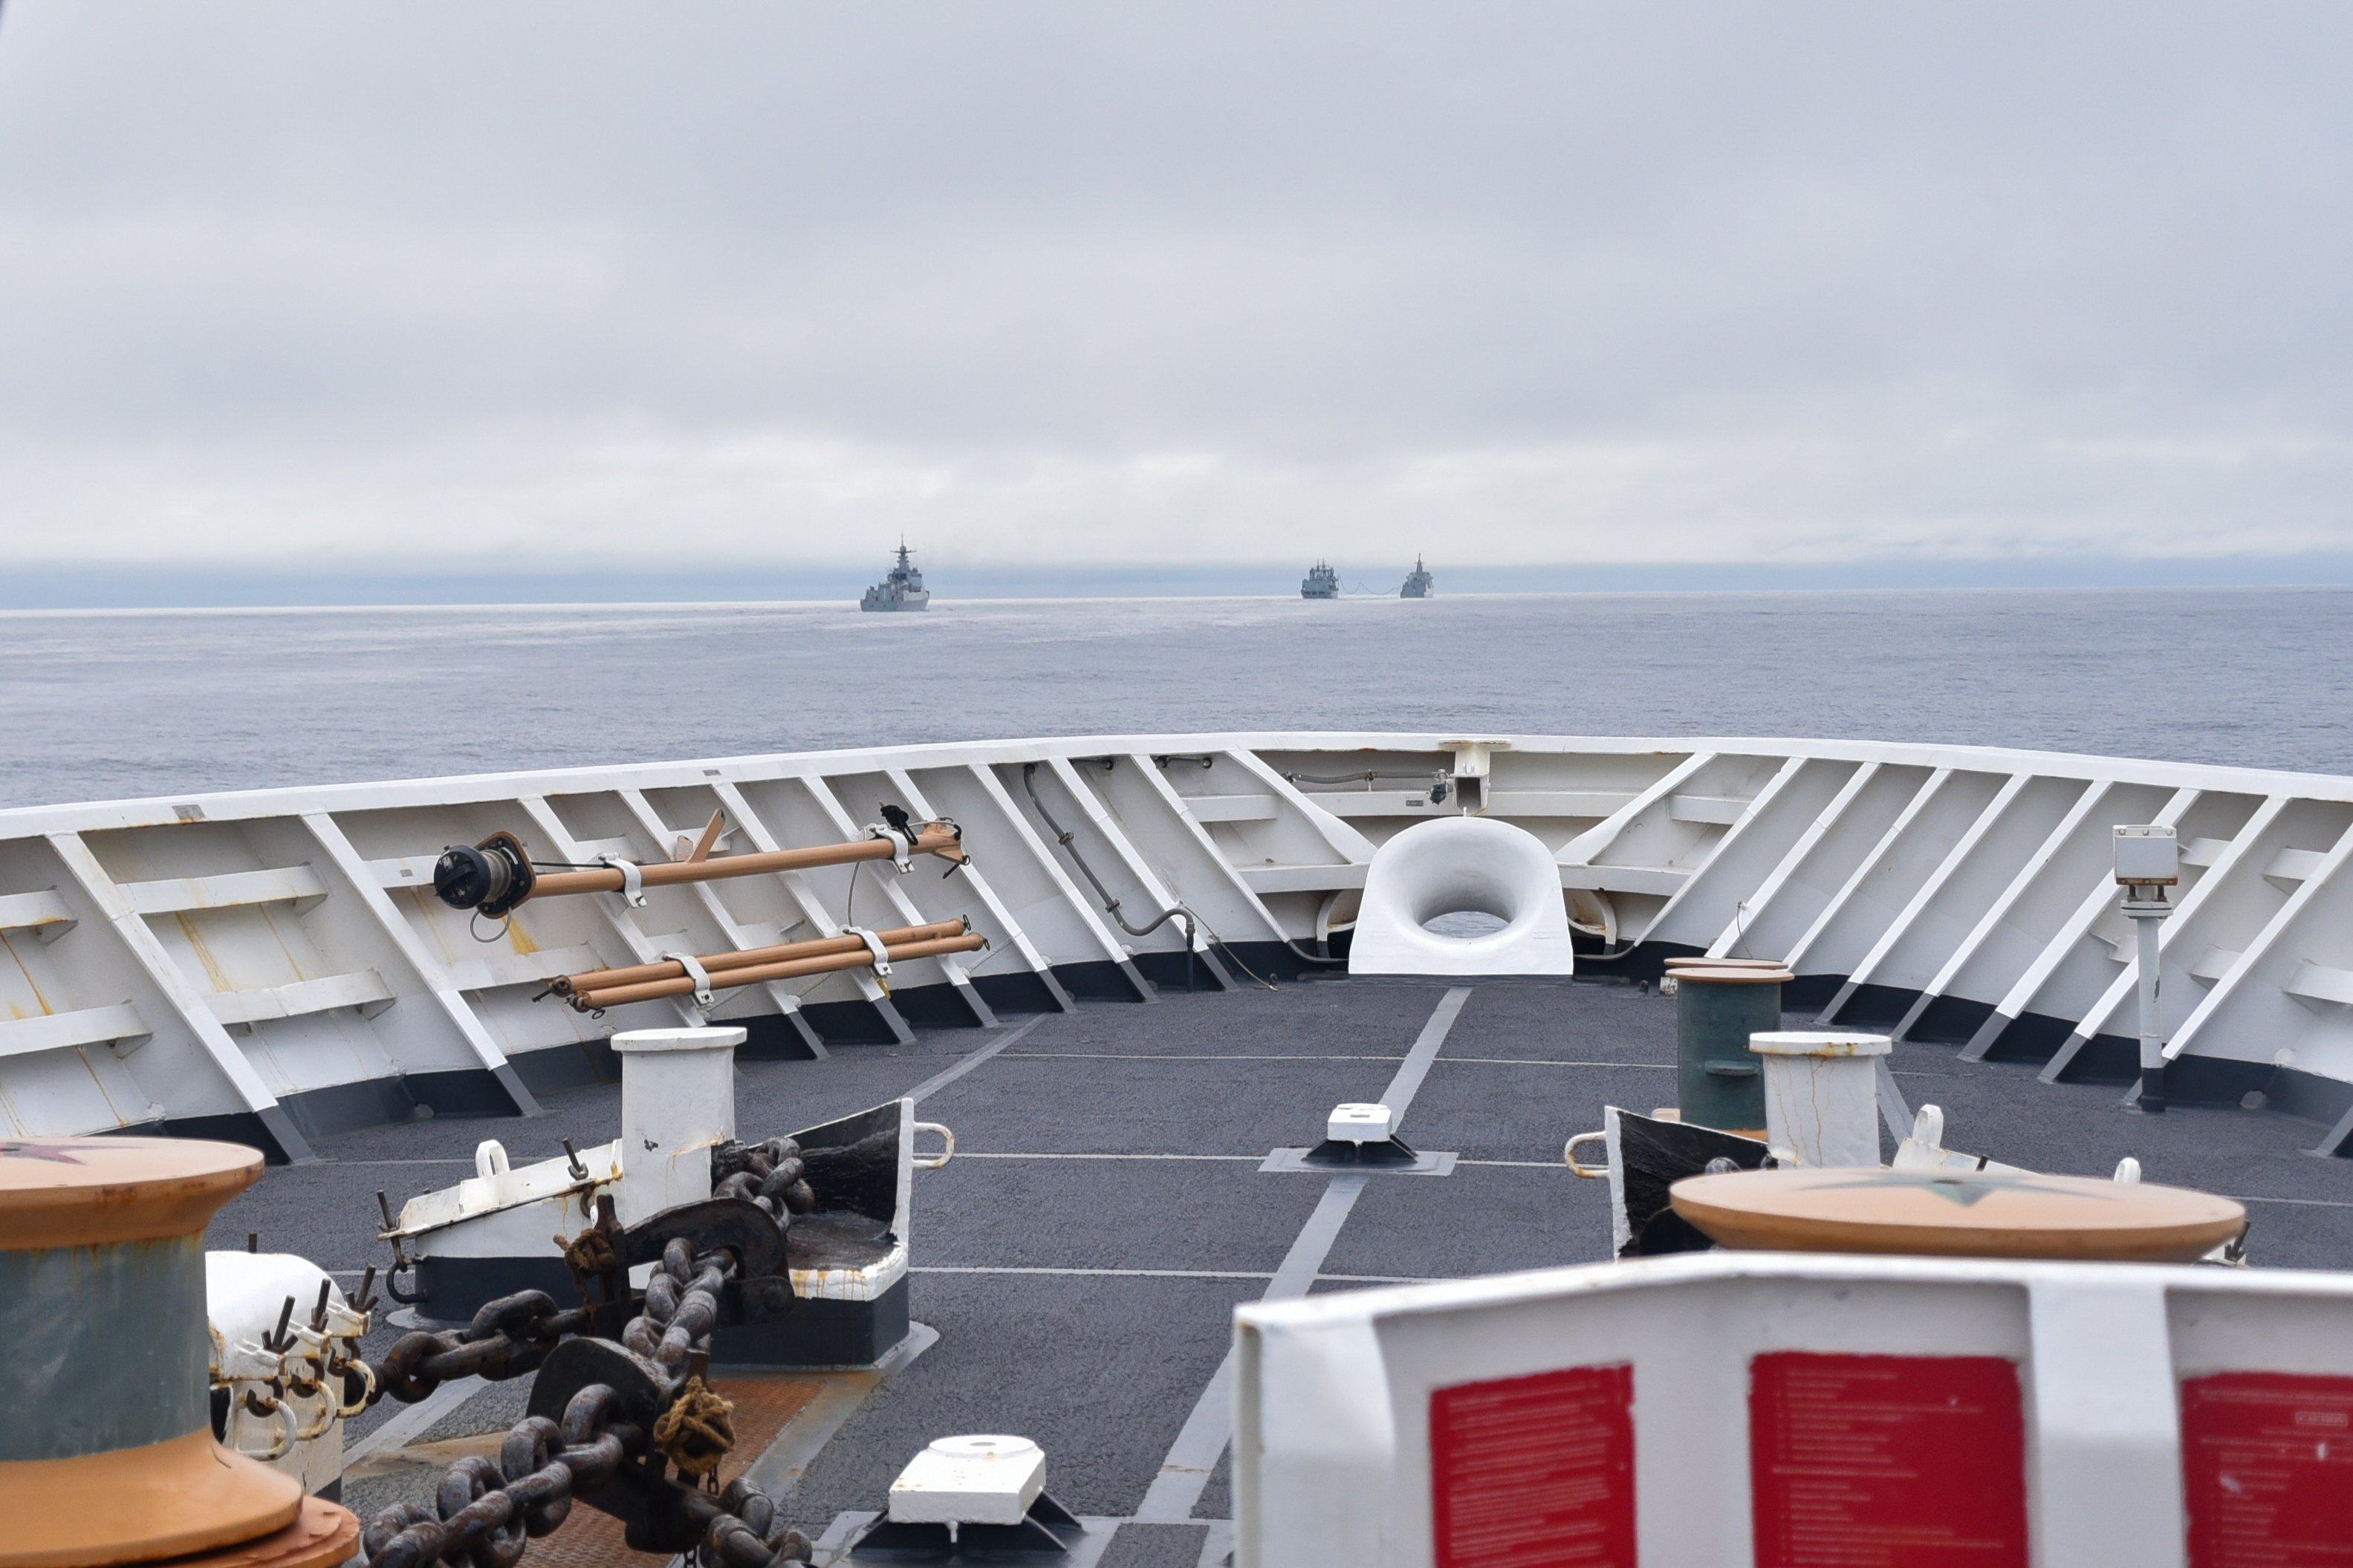 Chinese warships spotted by a the US coastguard in the waters off Alaska were on “freedom of navigation” operations. Photo: United States Coast Guard